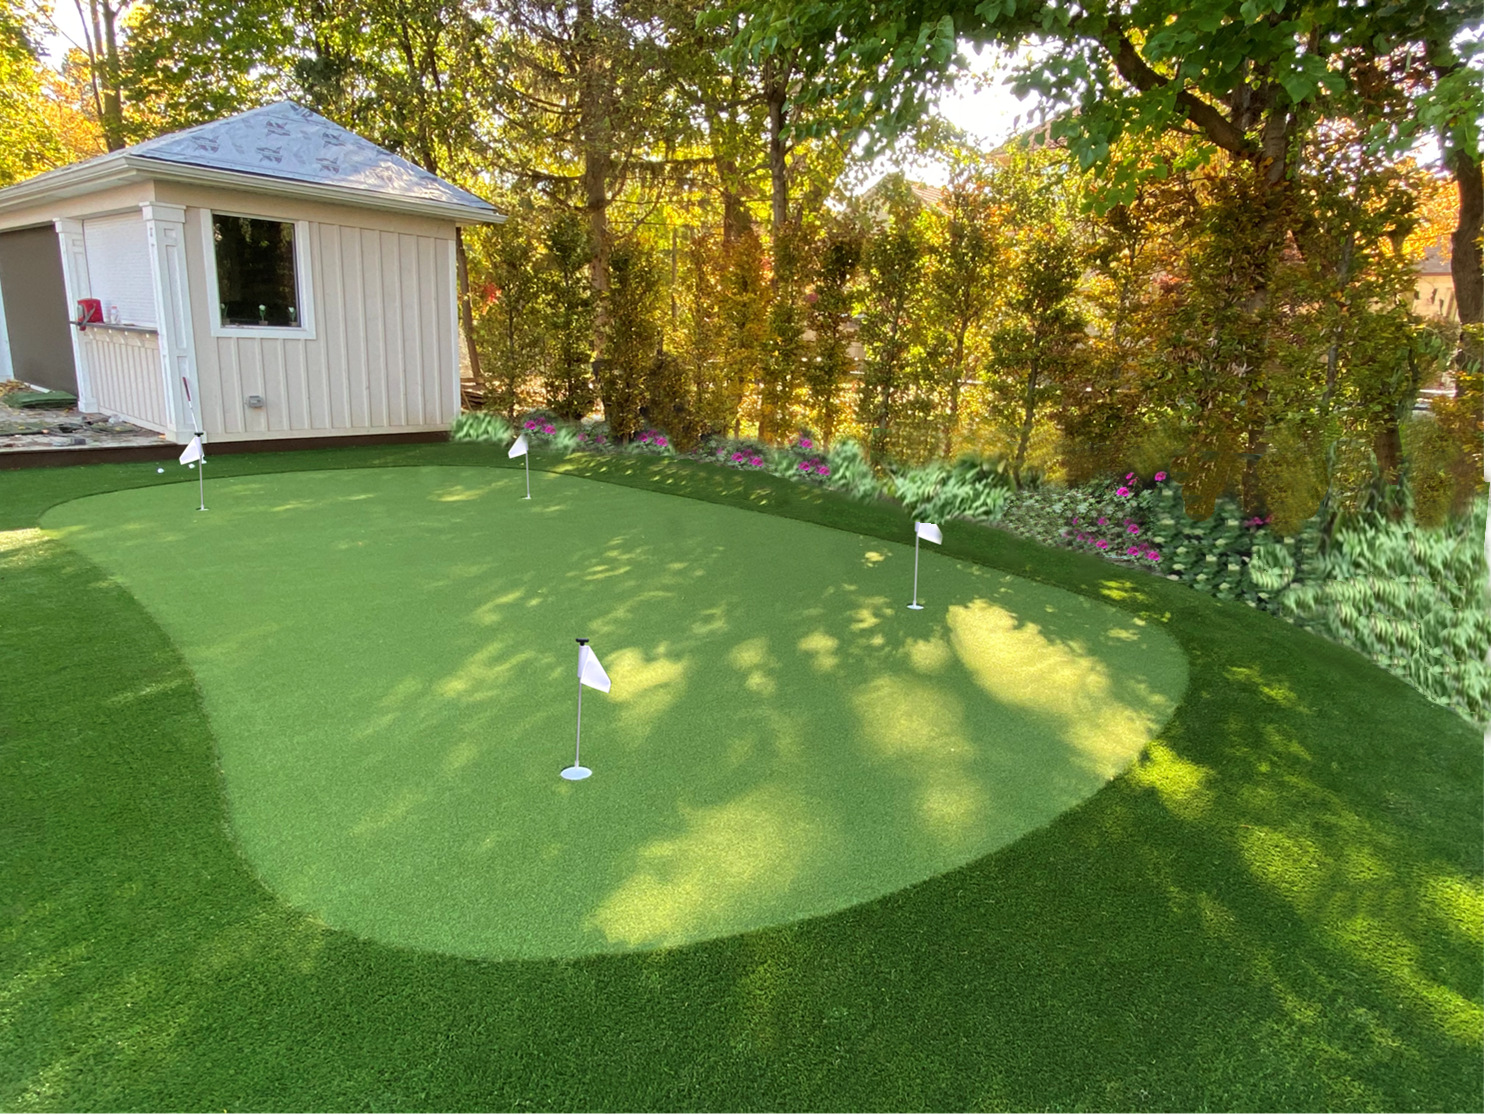 Putting green with gardens and new shed